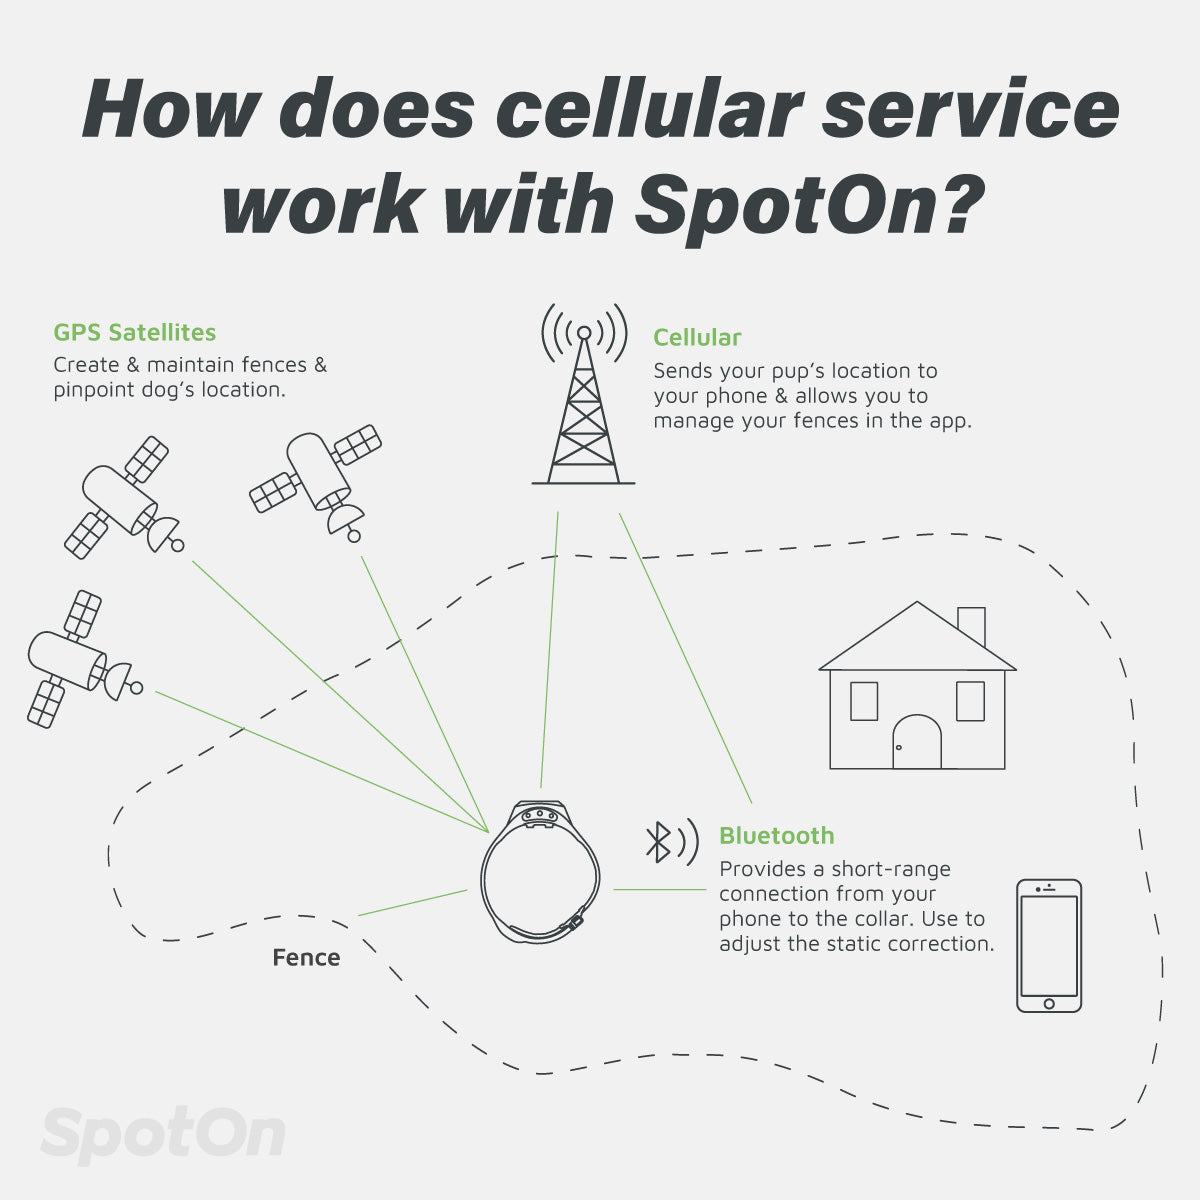 How Does Cellular Service Work With the SpotOn System?